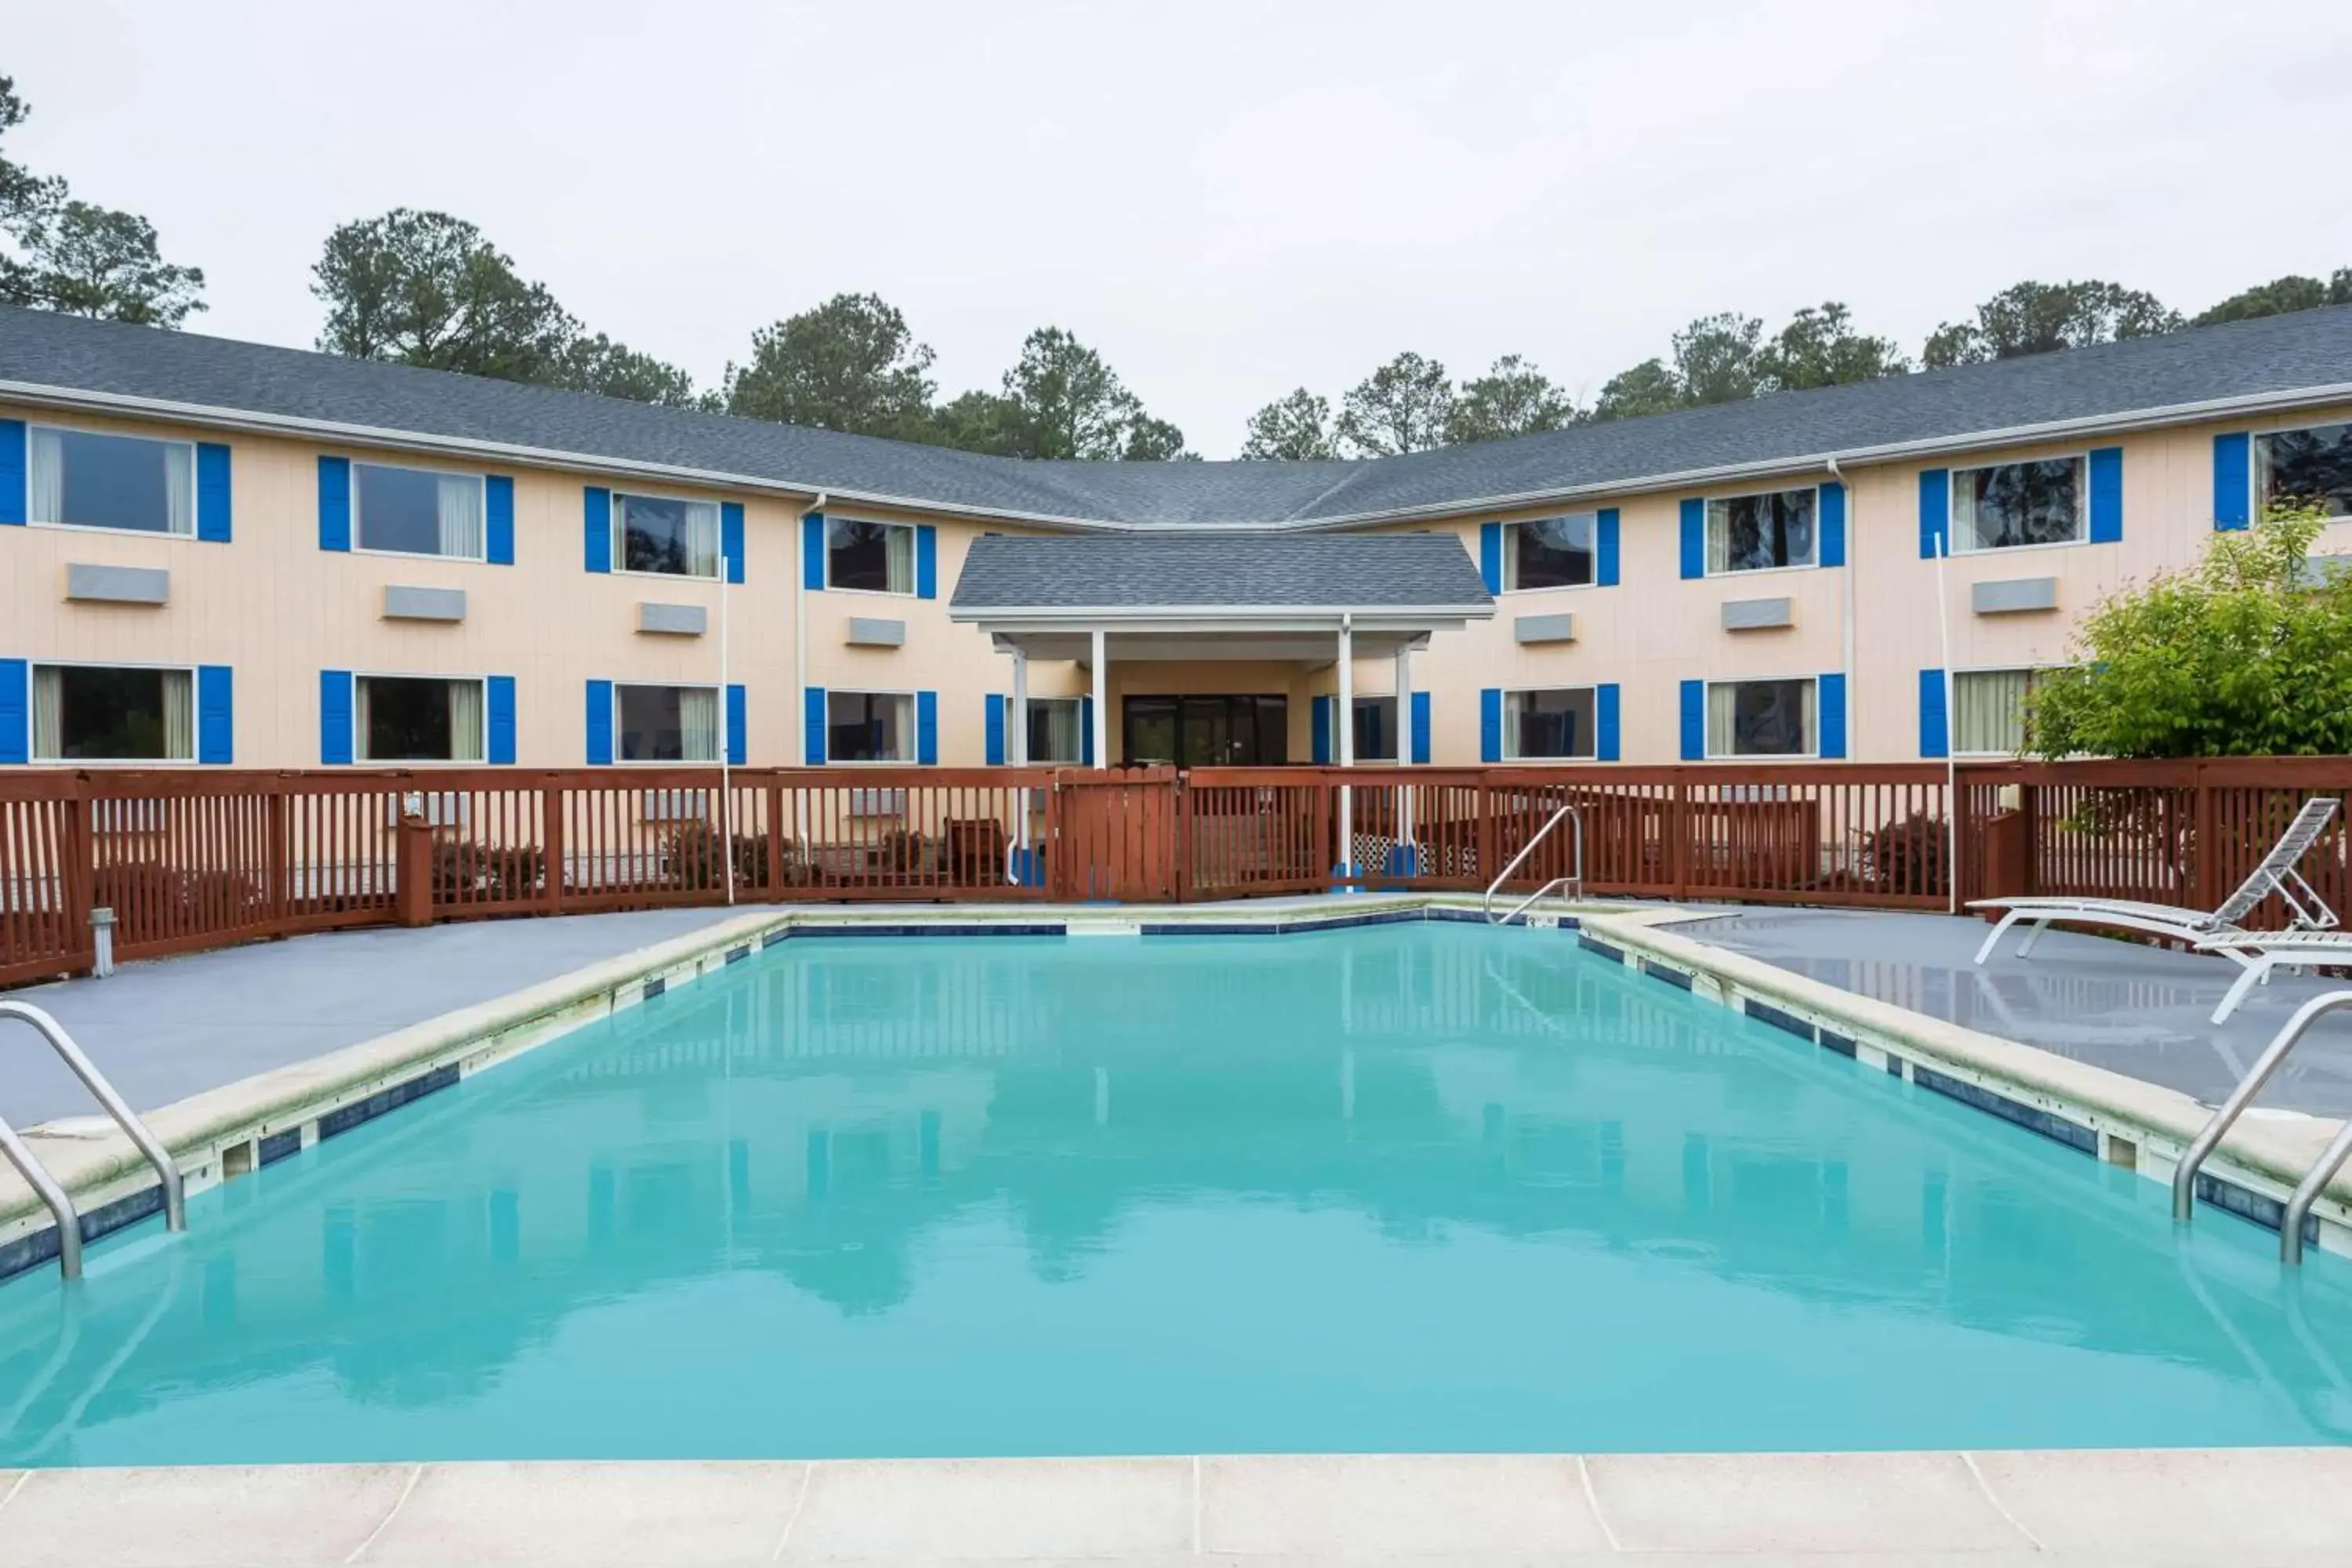 On site, Swimming Pool in Days Inn by Wyndham Chincoteague Island